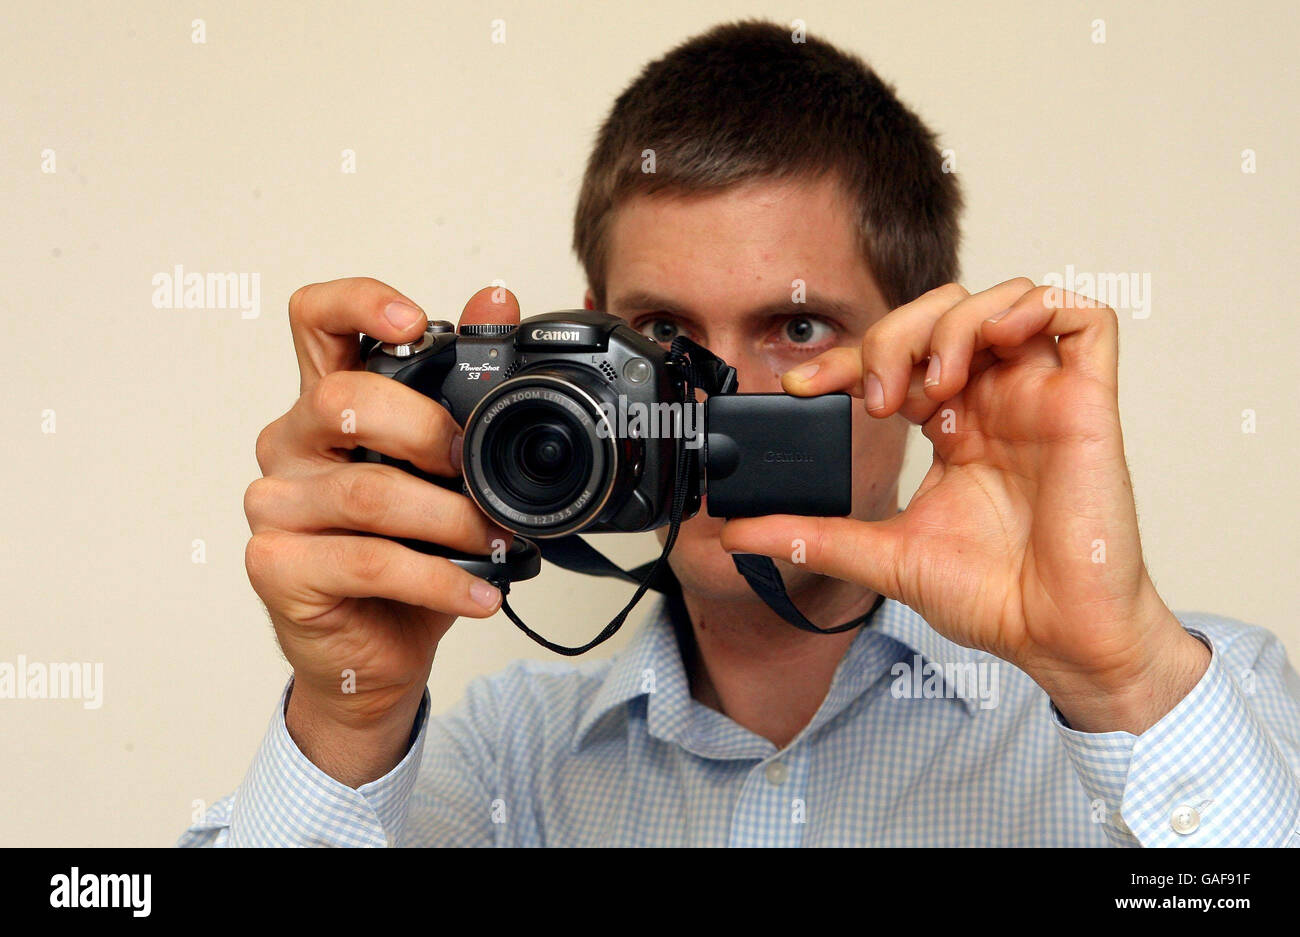 Stock photo of a photographer using a Canon Powershot S3 IS video camera. Stock Photo